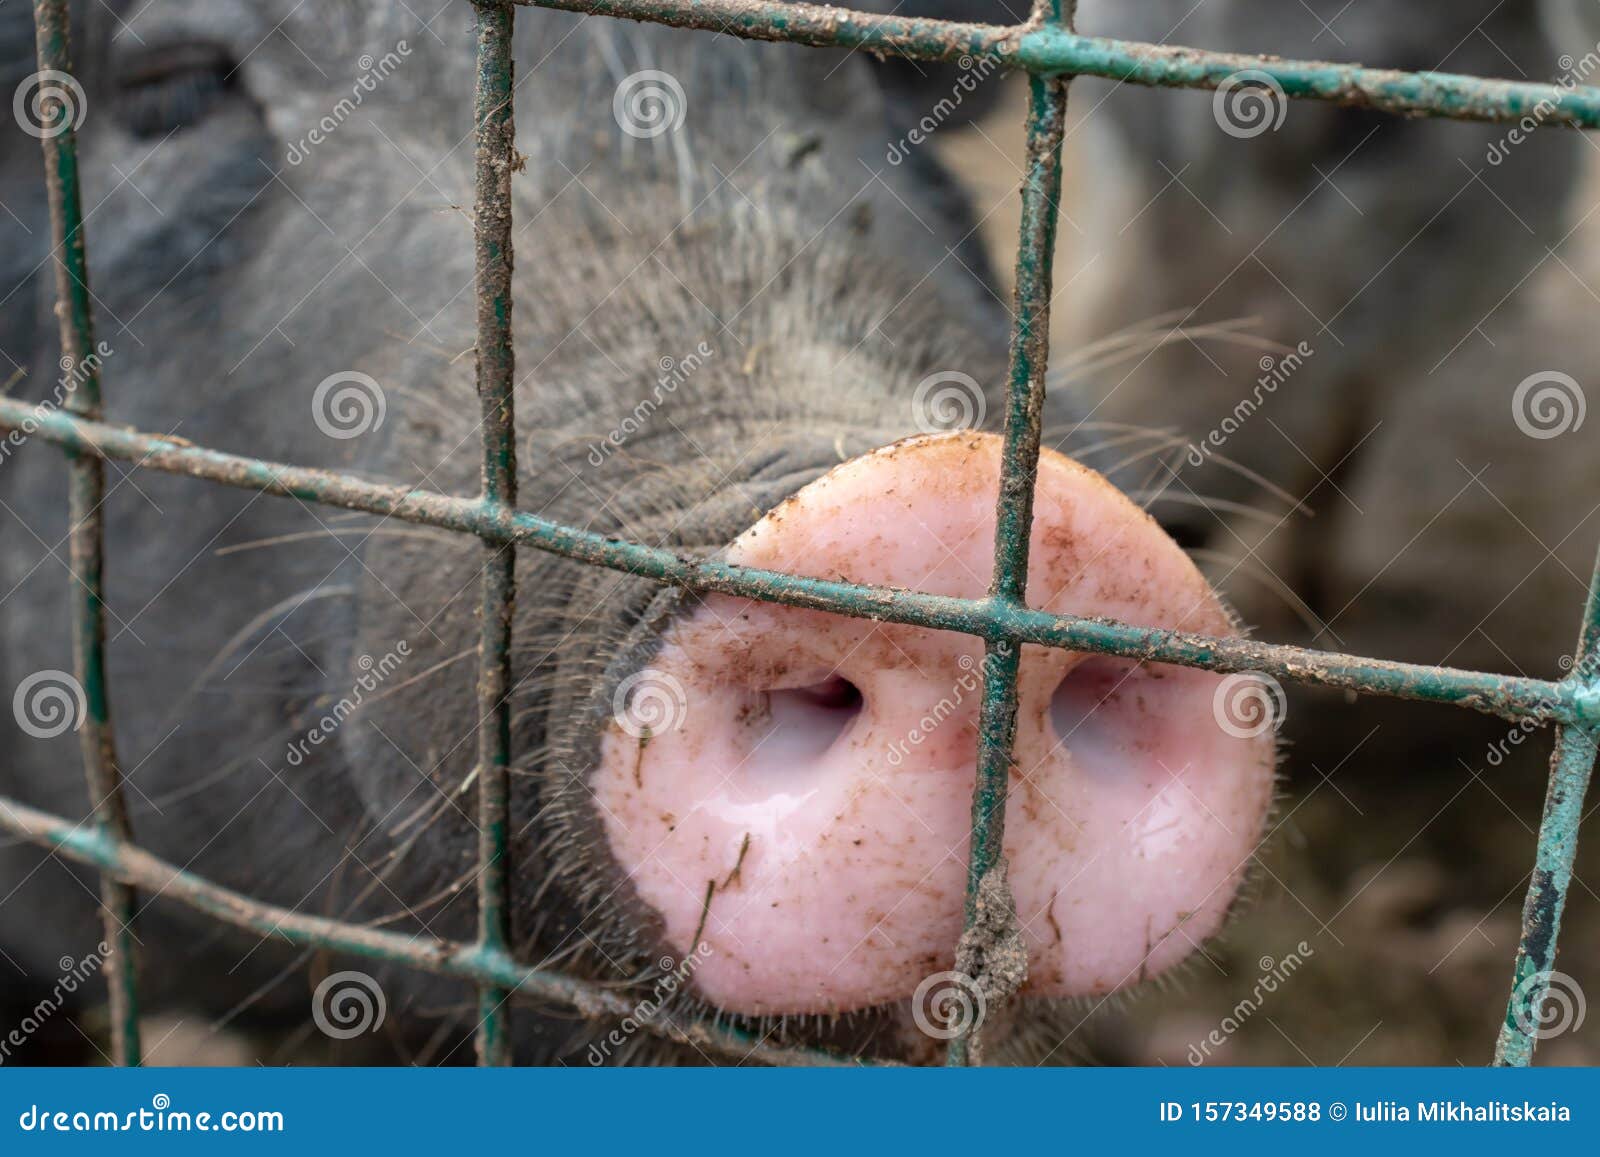 Dirty Pig Snout Nose Behind The Bars Of A Pigsty Close Up Stock Photo